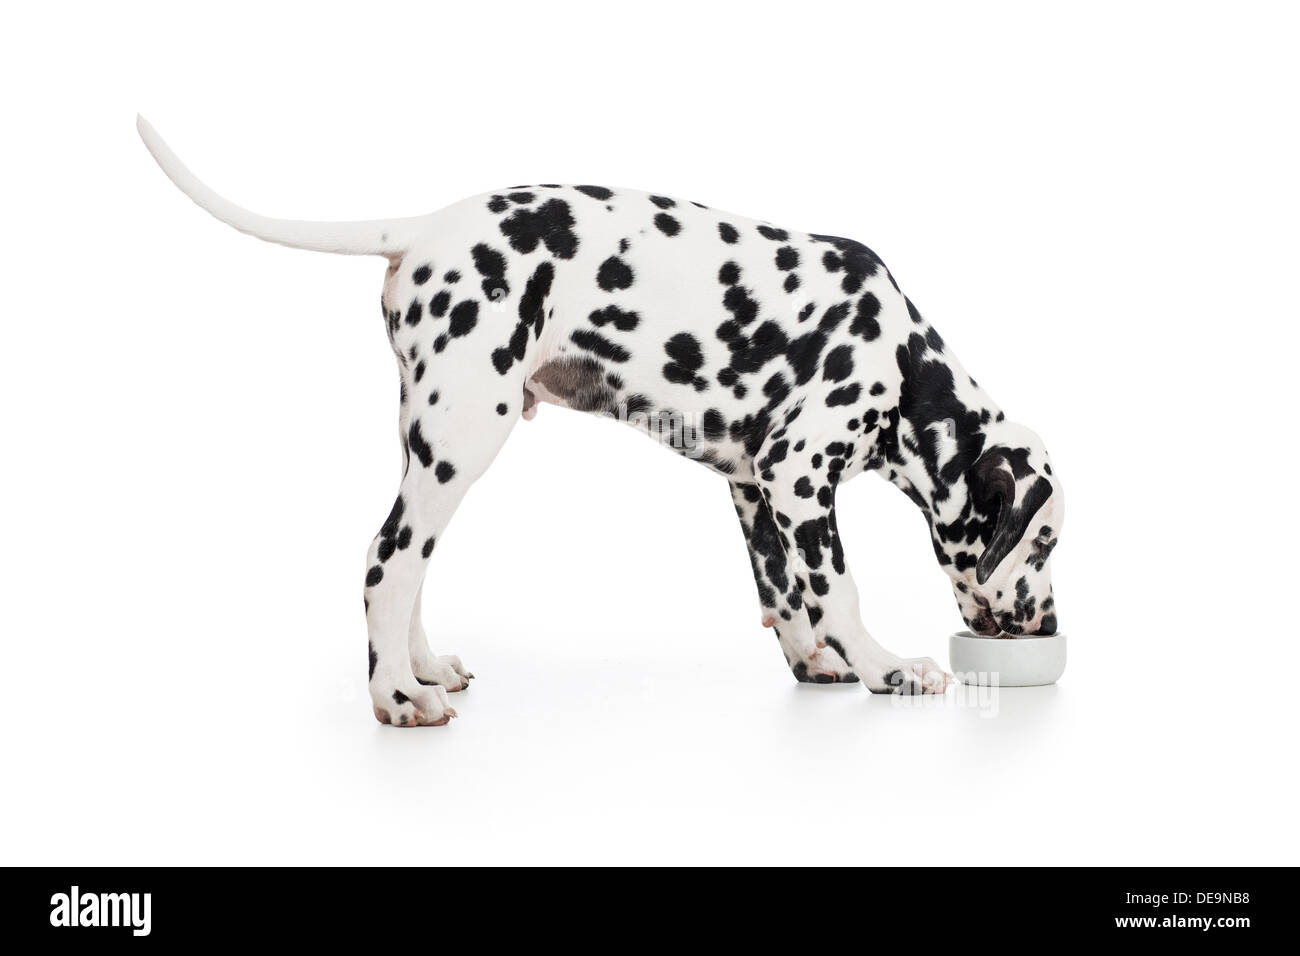 Dalmatian dog side view eating from bowl isolated on white Stock Photo